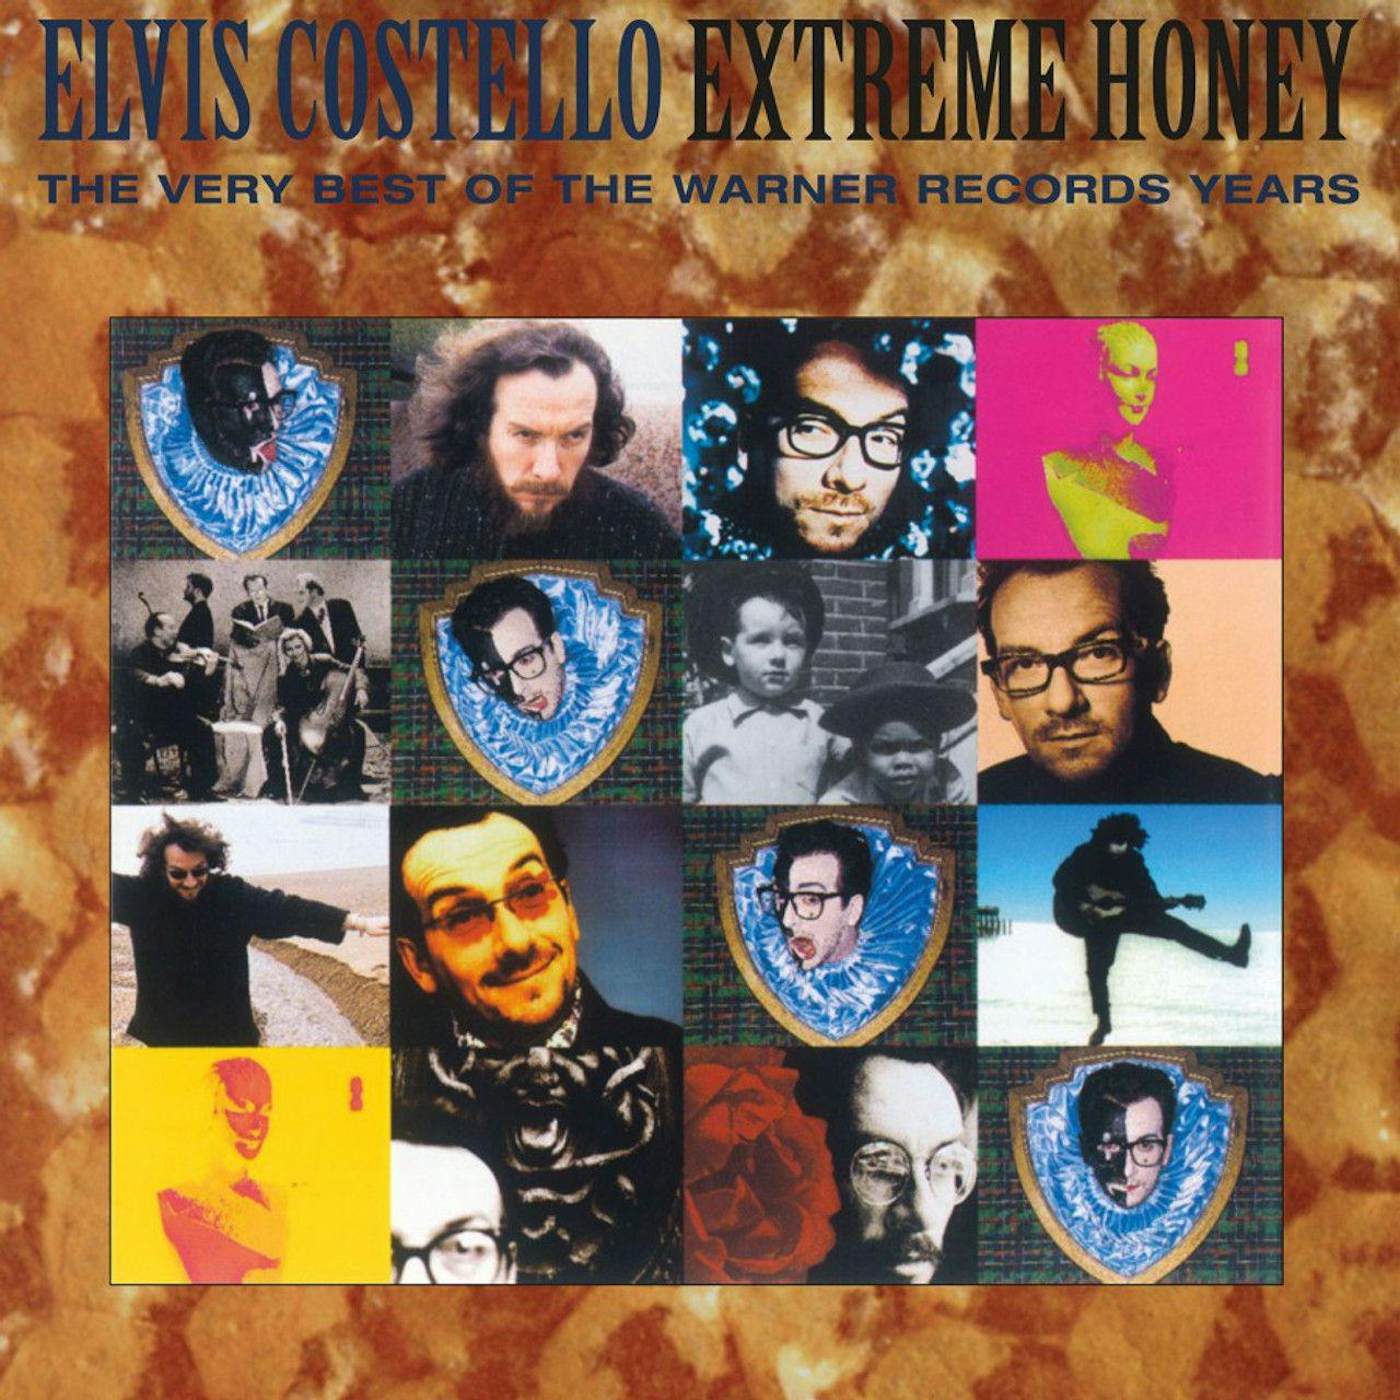 Elvis Costello Extreme Honey: The Very Best Of The Warner Years Vinyl Record